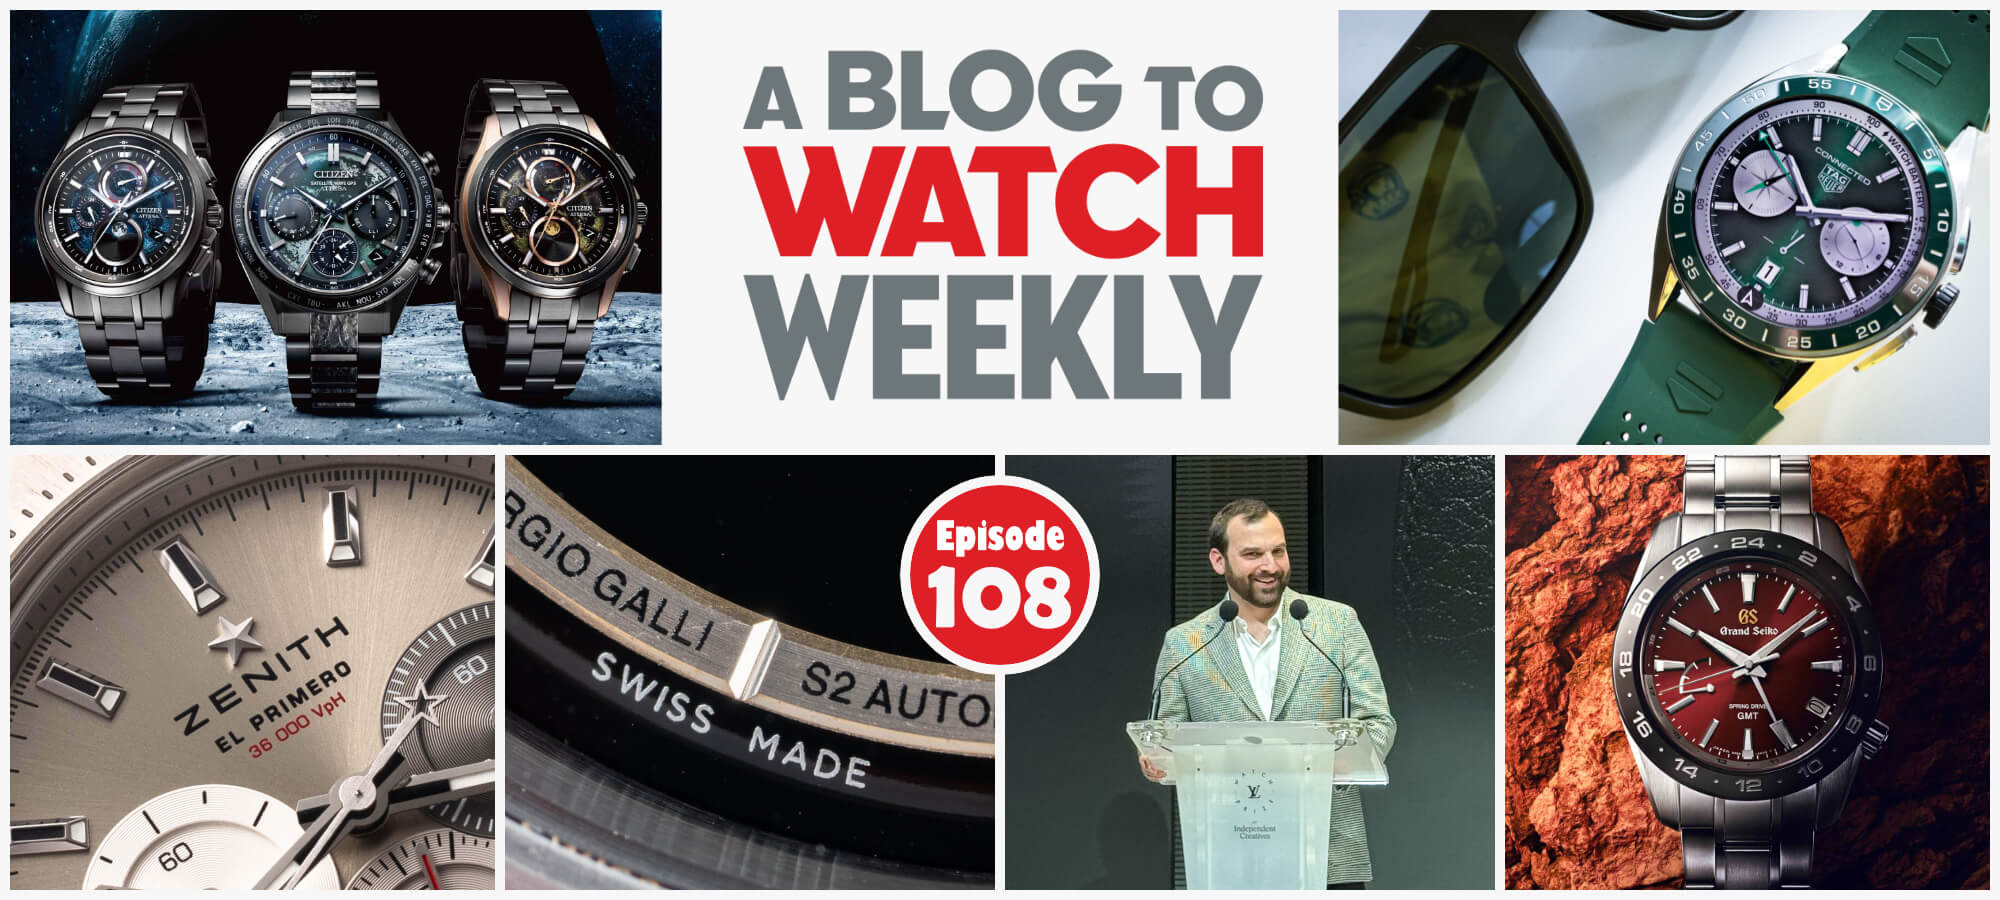 aBlogtoWatch Weekly Episode 108